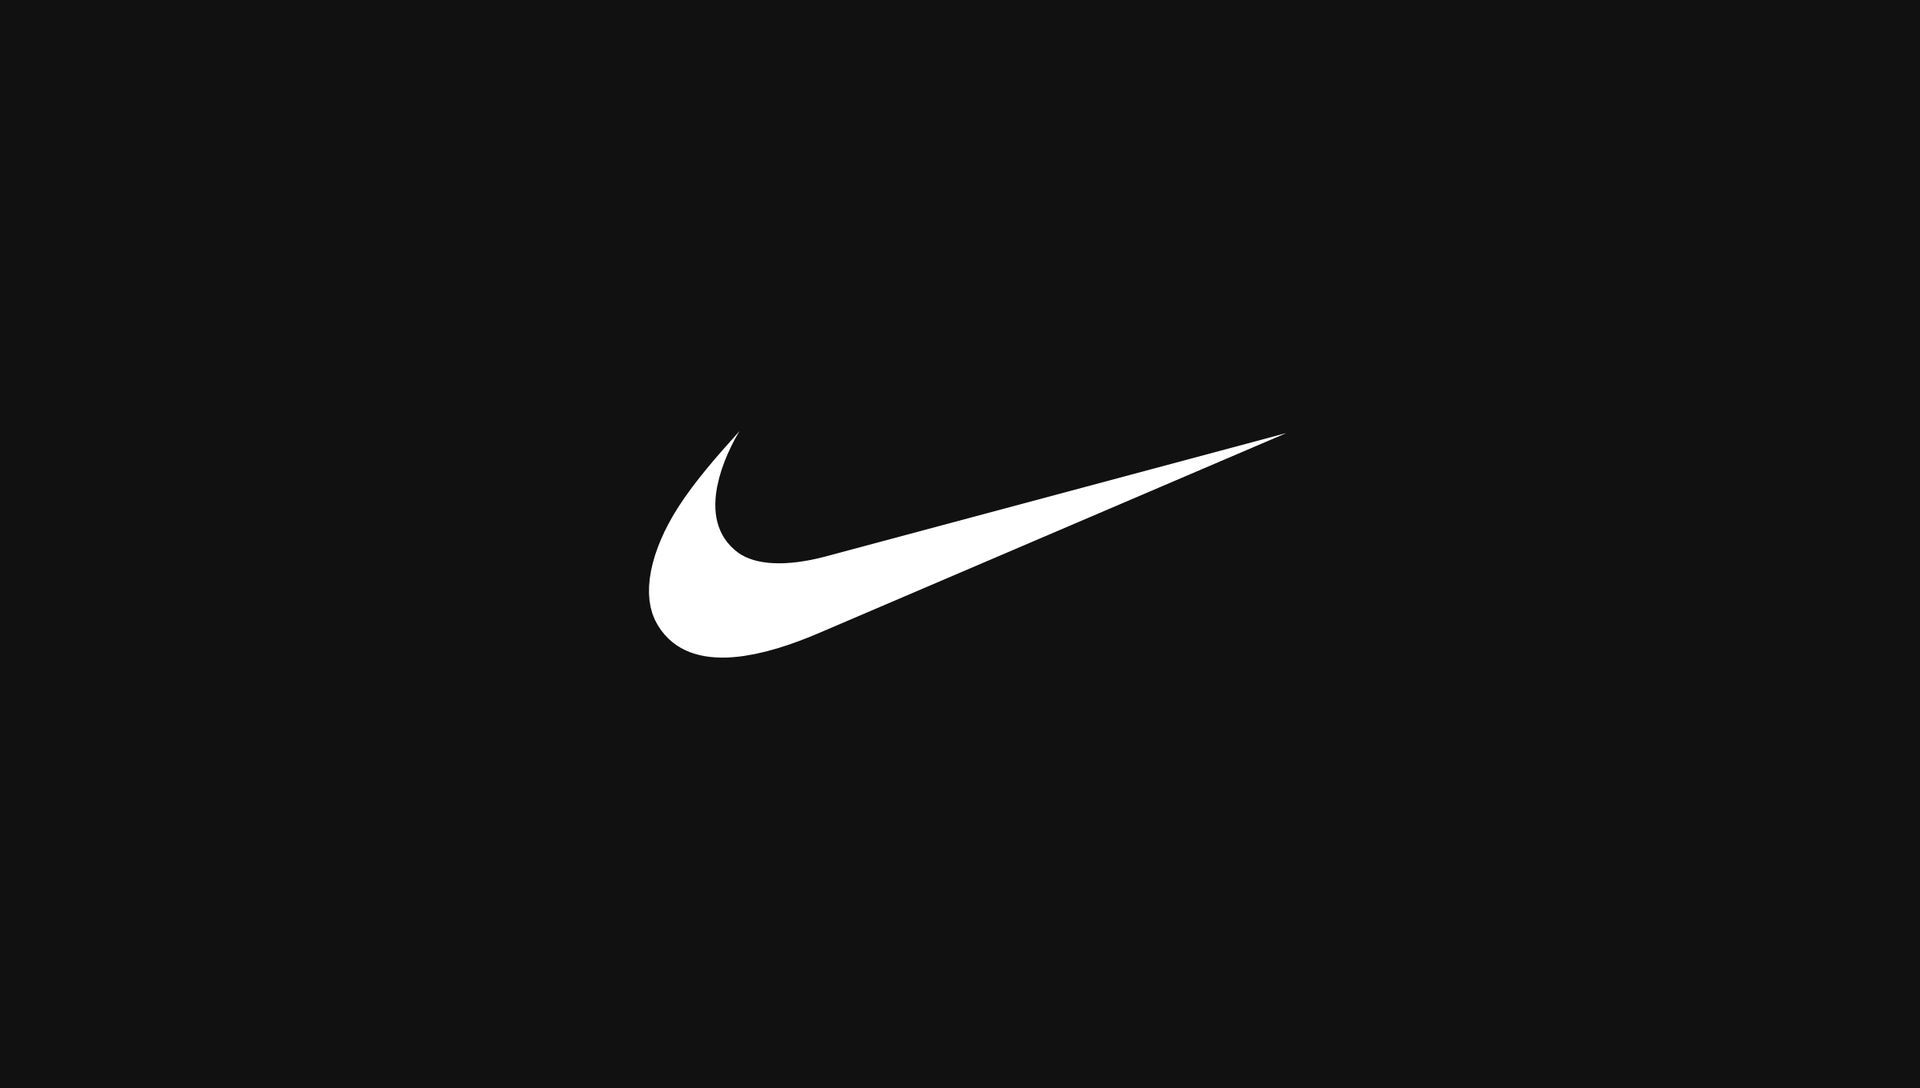 Nike Early Access Sale: Select Footwear & Apparel, Get Extra 20% Off + Free S&H on $50+